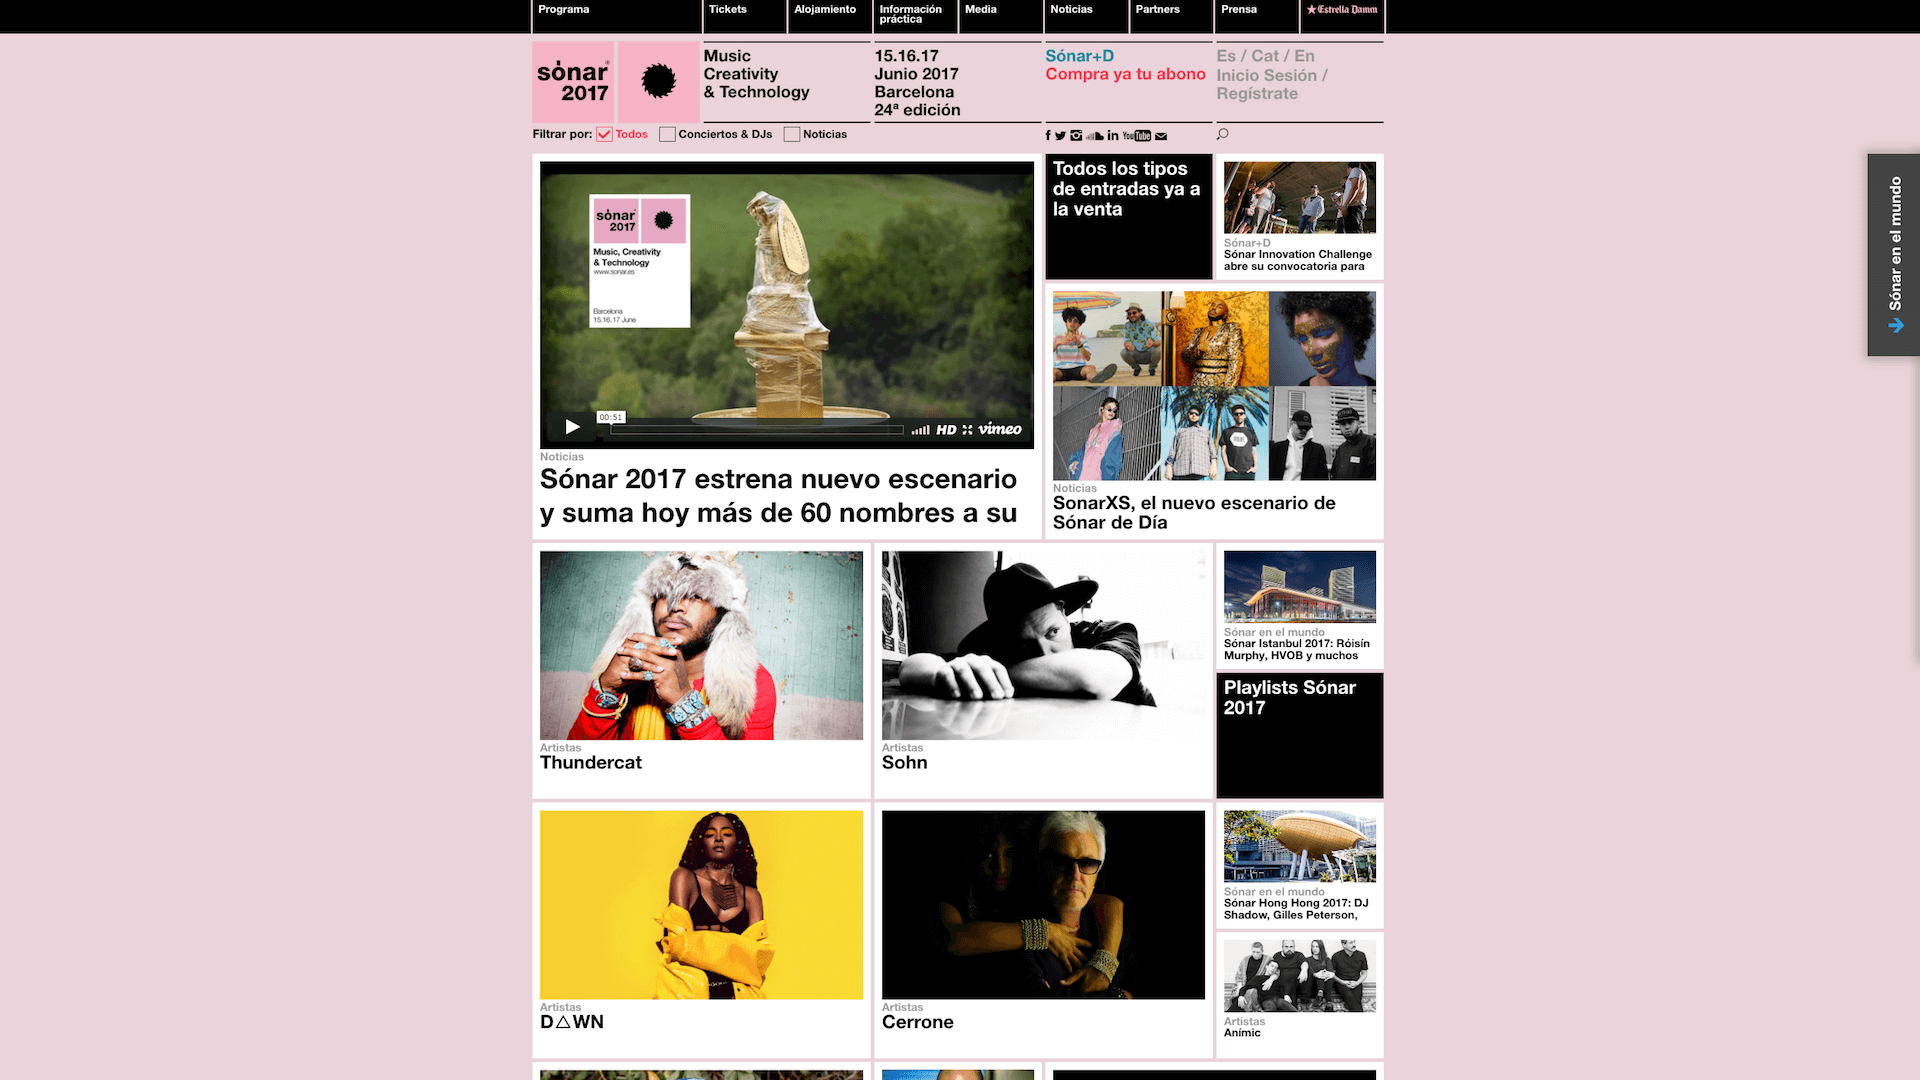 Screenshot of the home page of the Sonar 2017 website